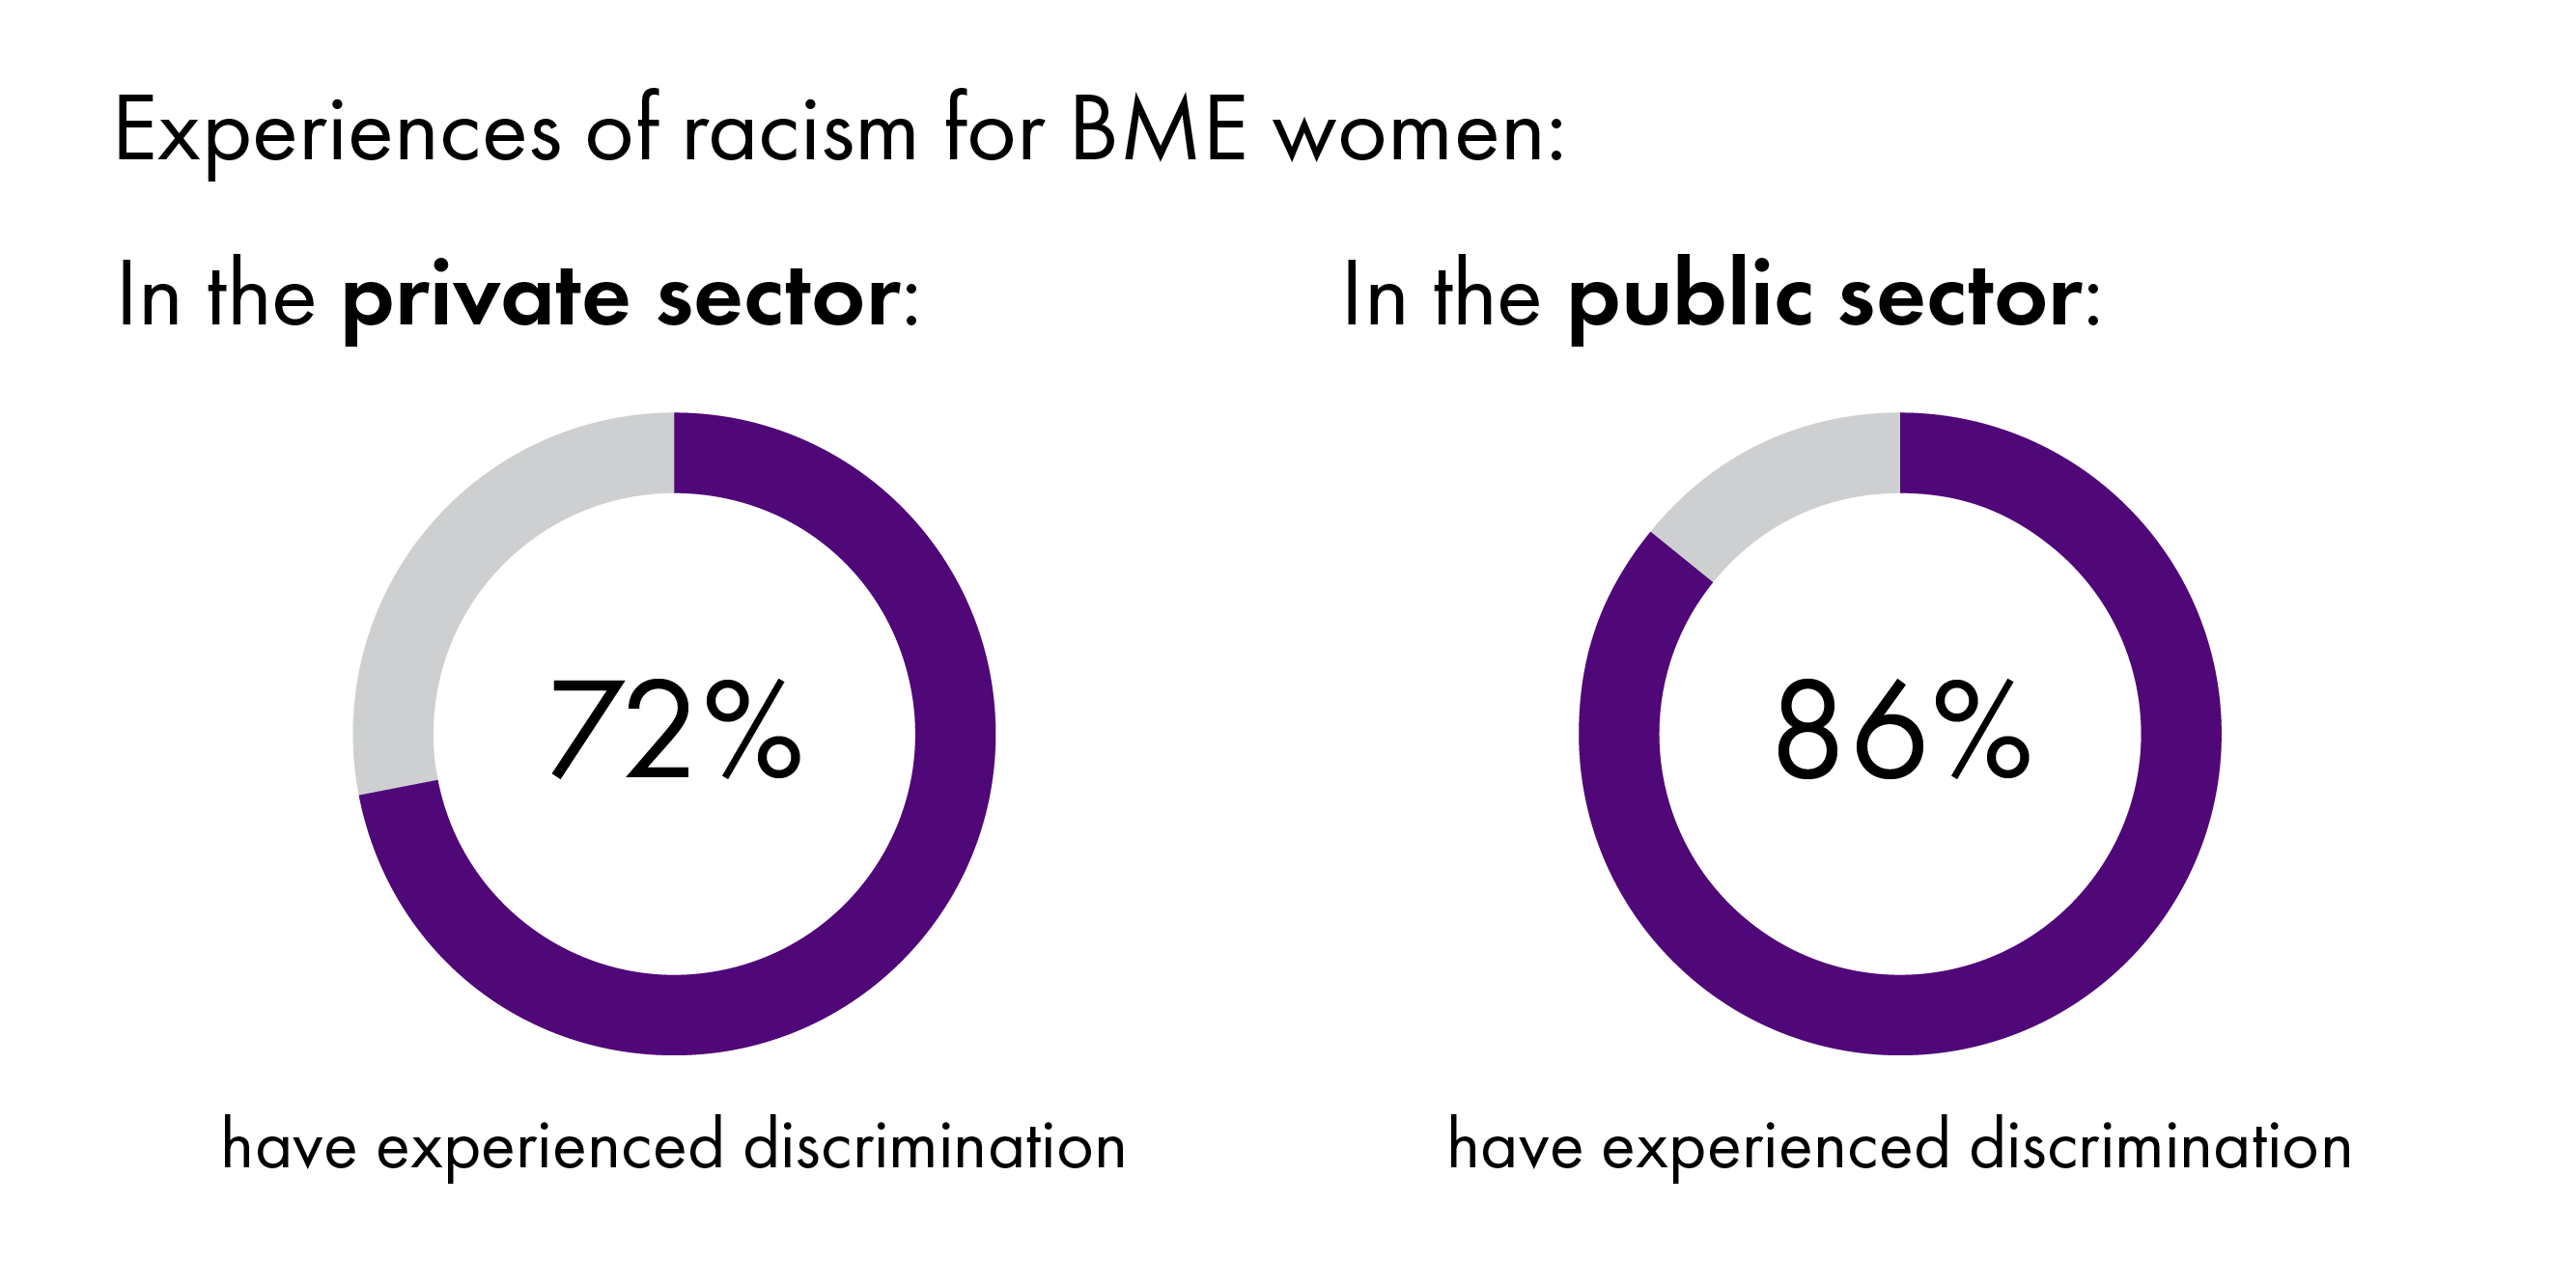 A chart showing BME women experience more racism in public sector employment than private sector though both are high, 86% and 72% respectively.